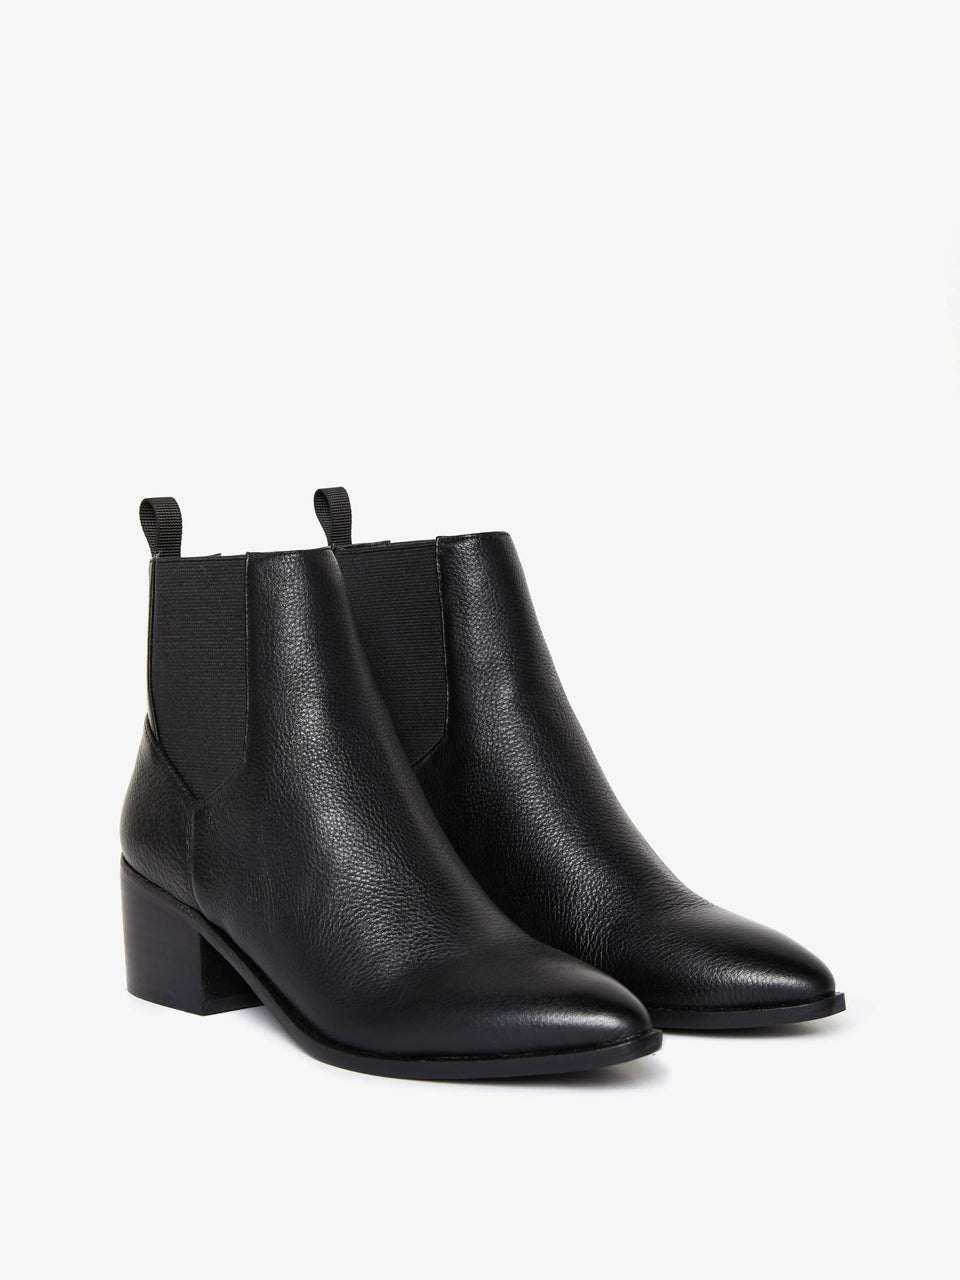 Chinese_Laundry_Filip_Leather_Bootie_Black